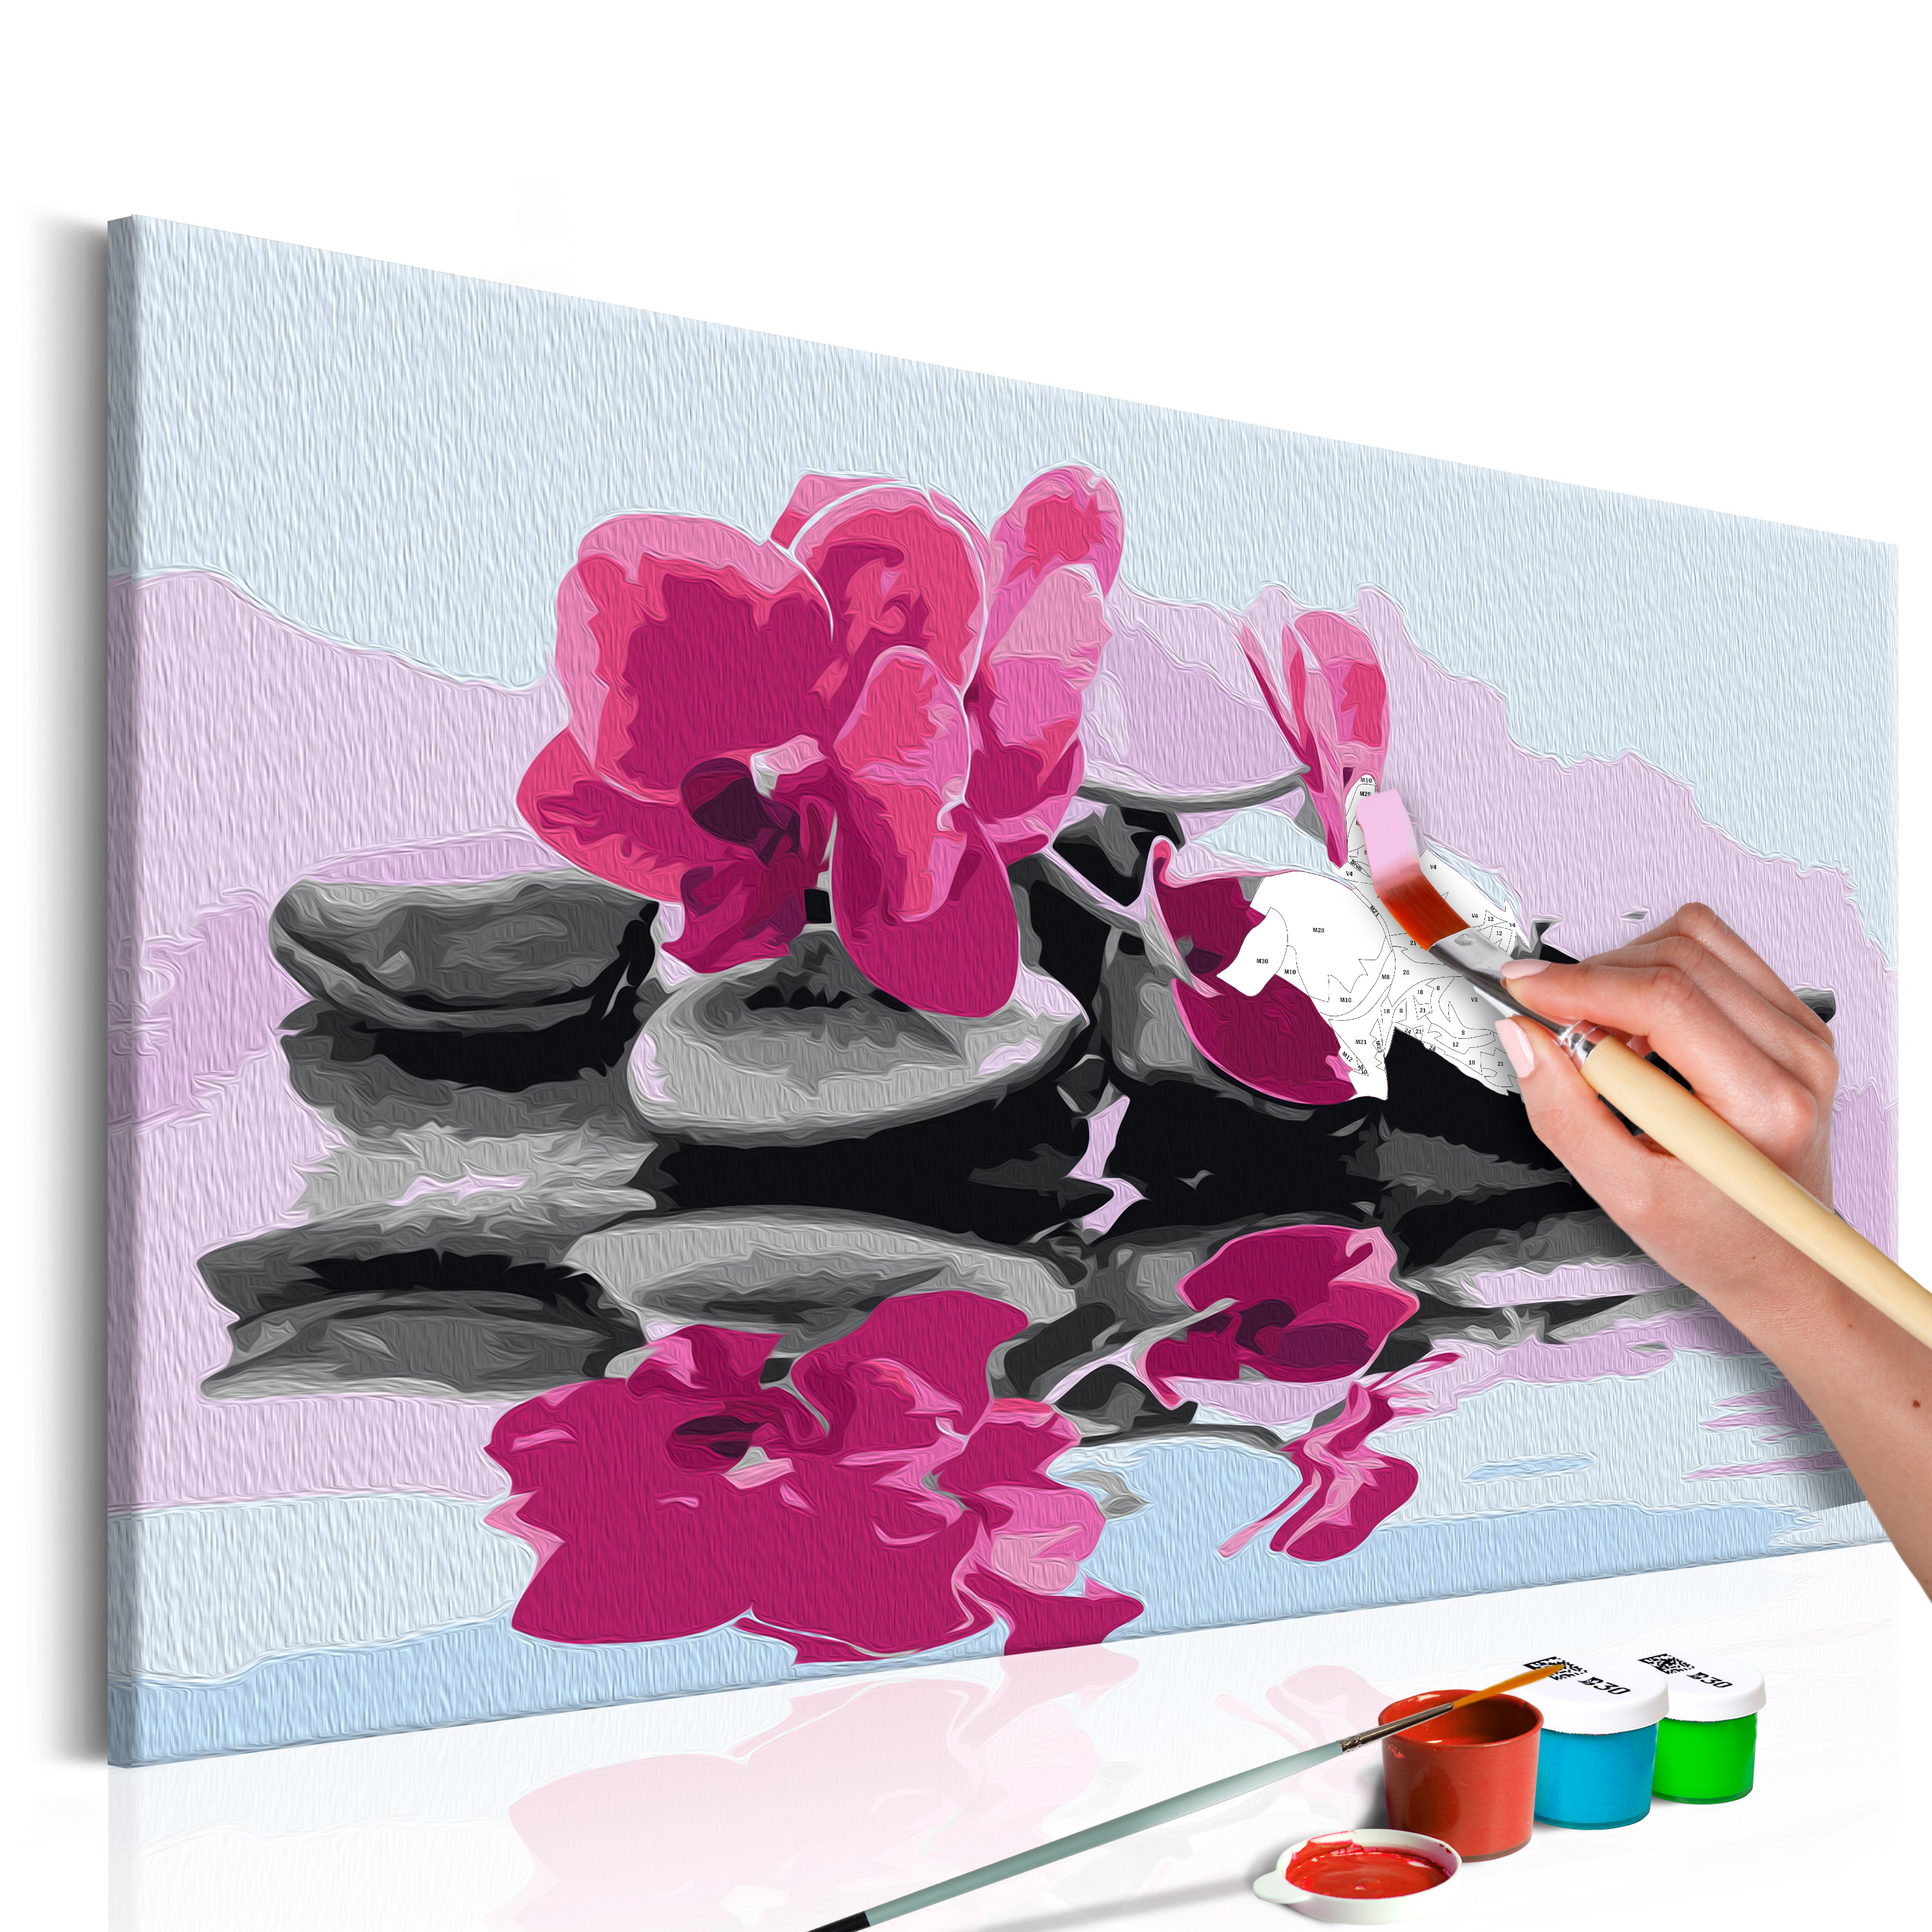 DIY canvas painting - Orchid With Zen Stones (Reflection In The Water) - 60x40